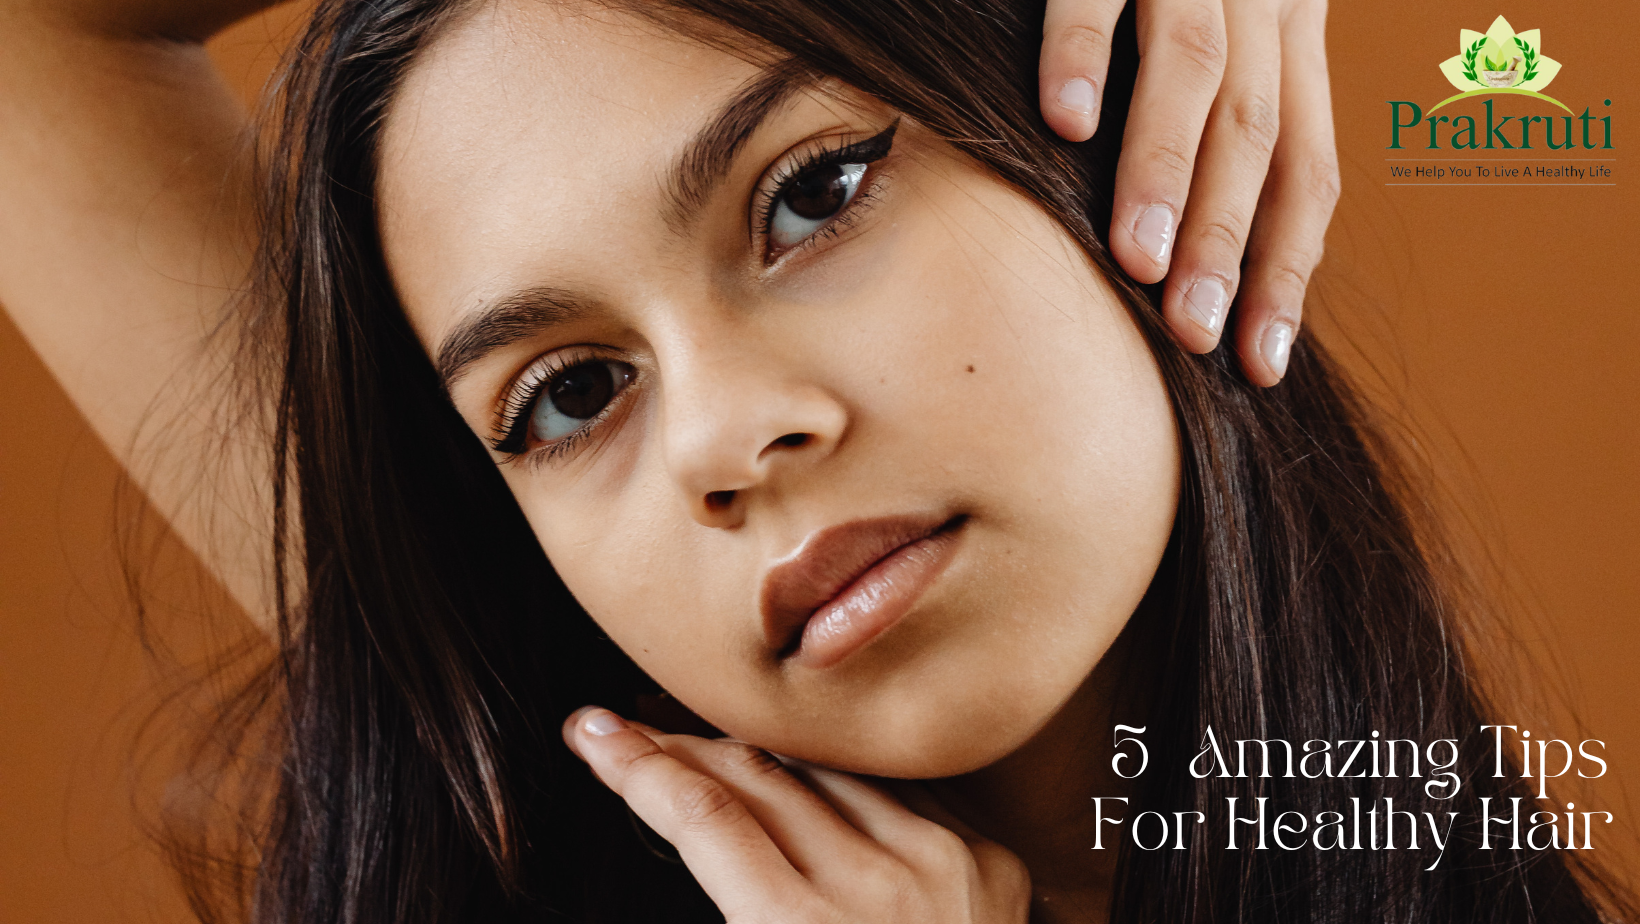 Amazing Tips To Make Your Hair Strong, Silky & Beautiful